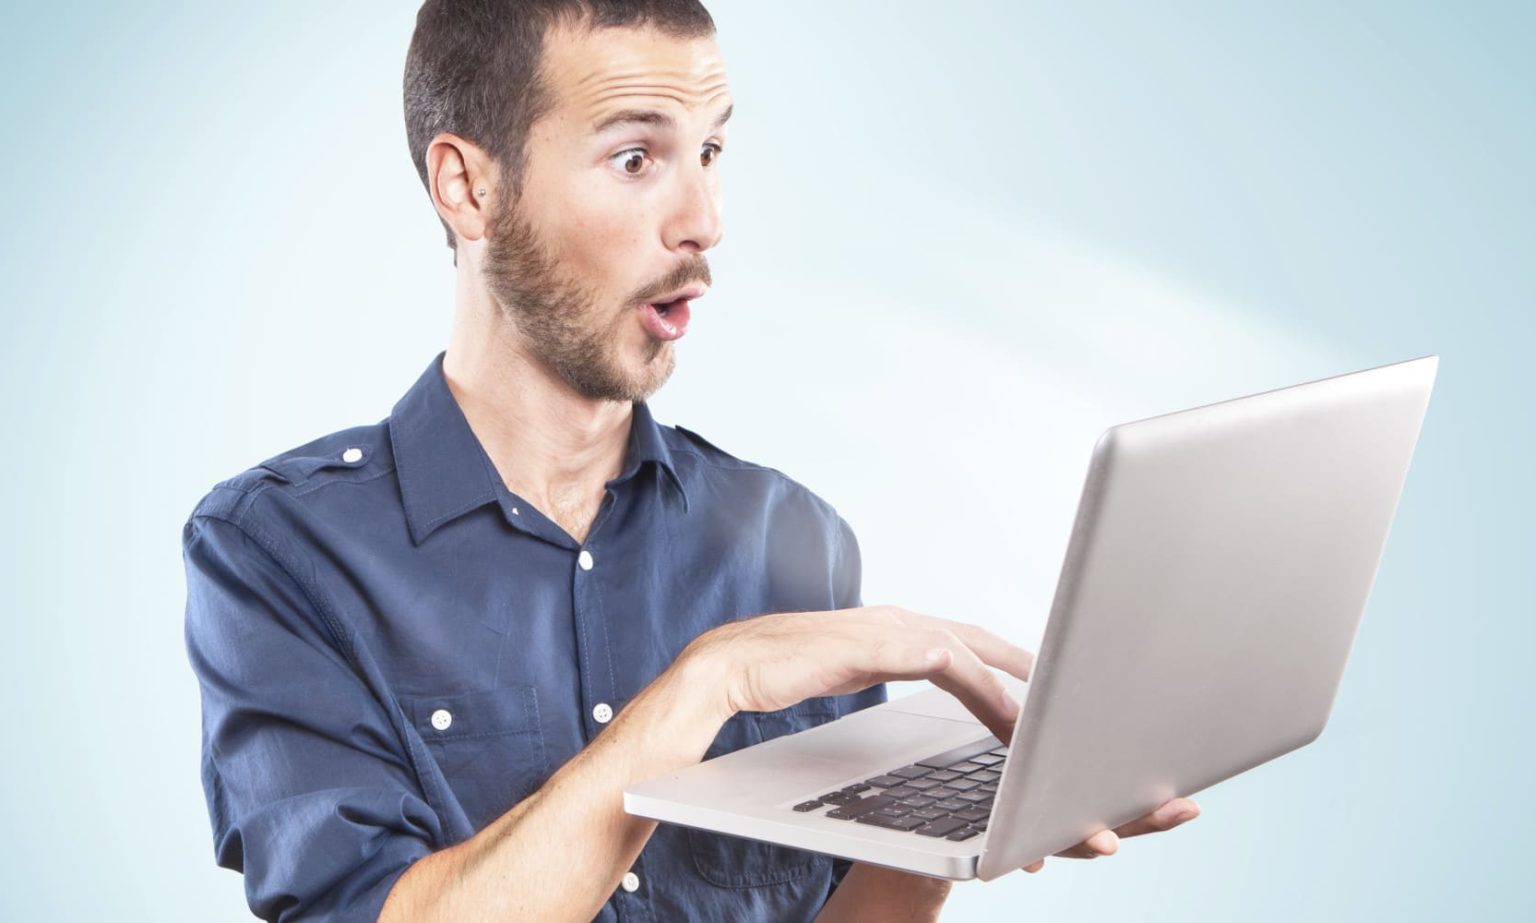 Young man surprised holding a laptop